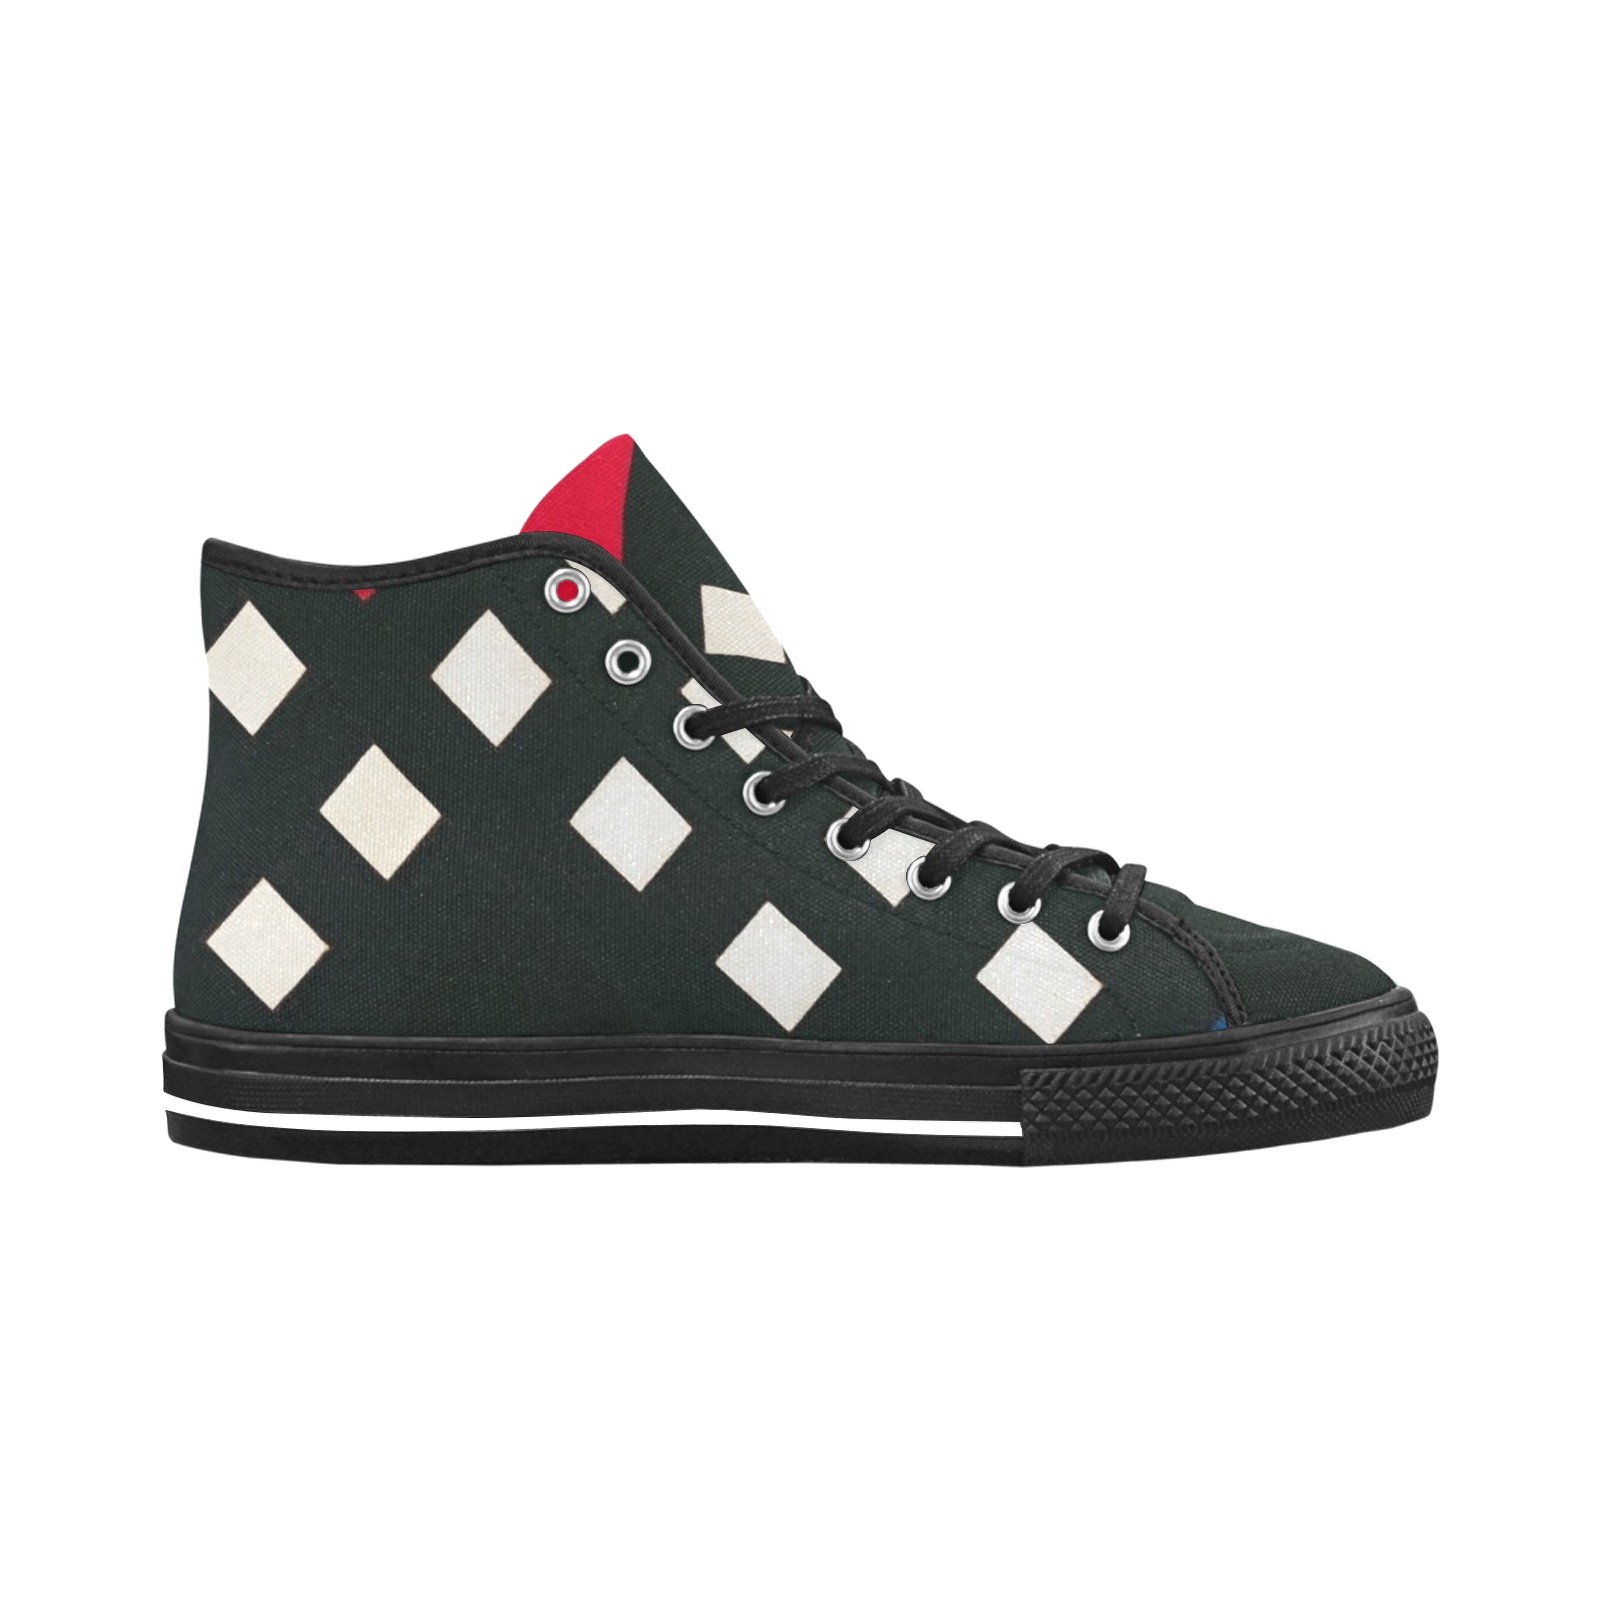 Counter-composition XV by Theo van Doesburg- Vancouver H Women's Canvas Shoes (1013-1)